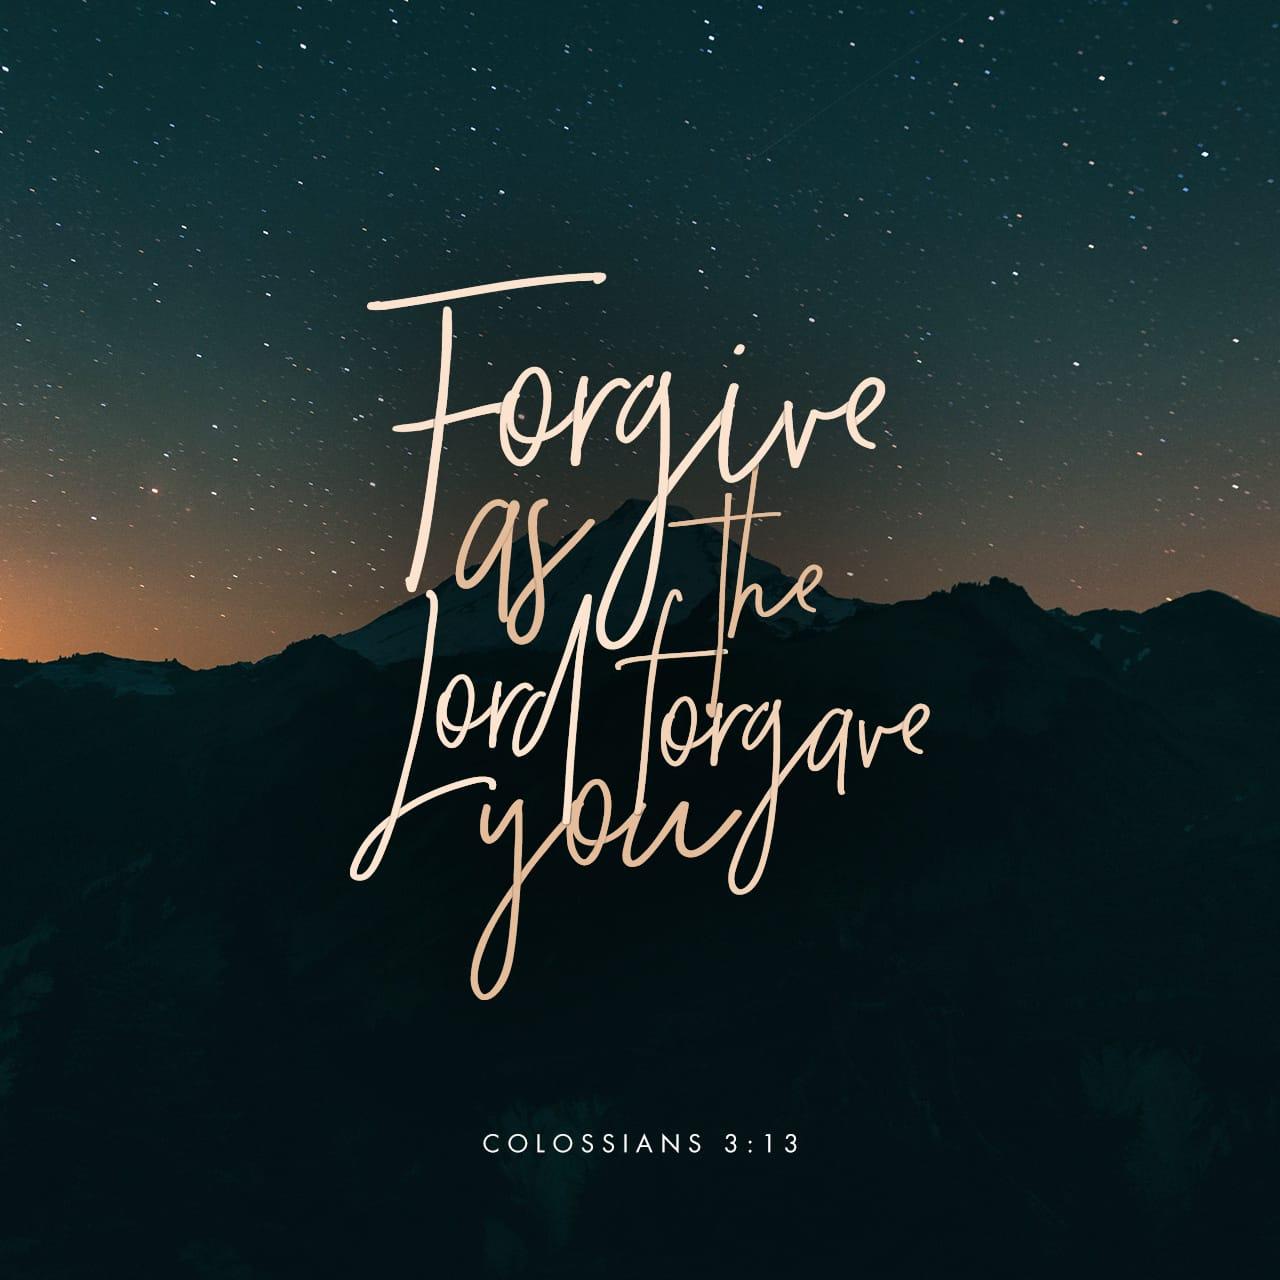 Bible Verse of the Day - day 160 - image 5783 (Colossians 3:12-14)